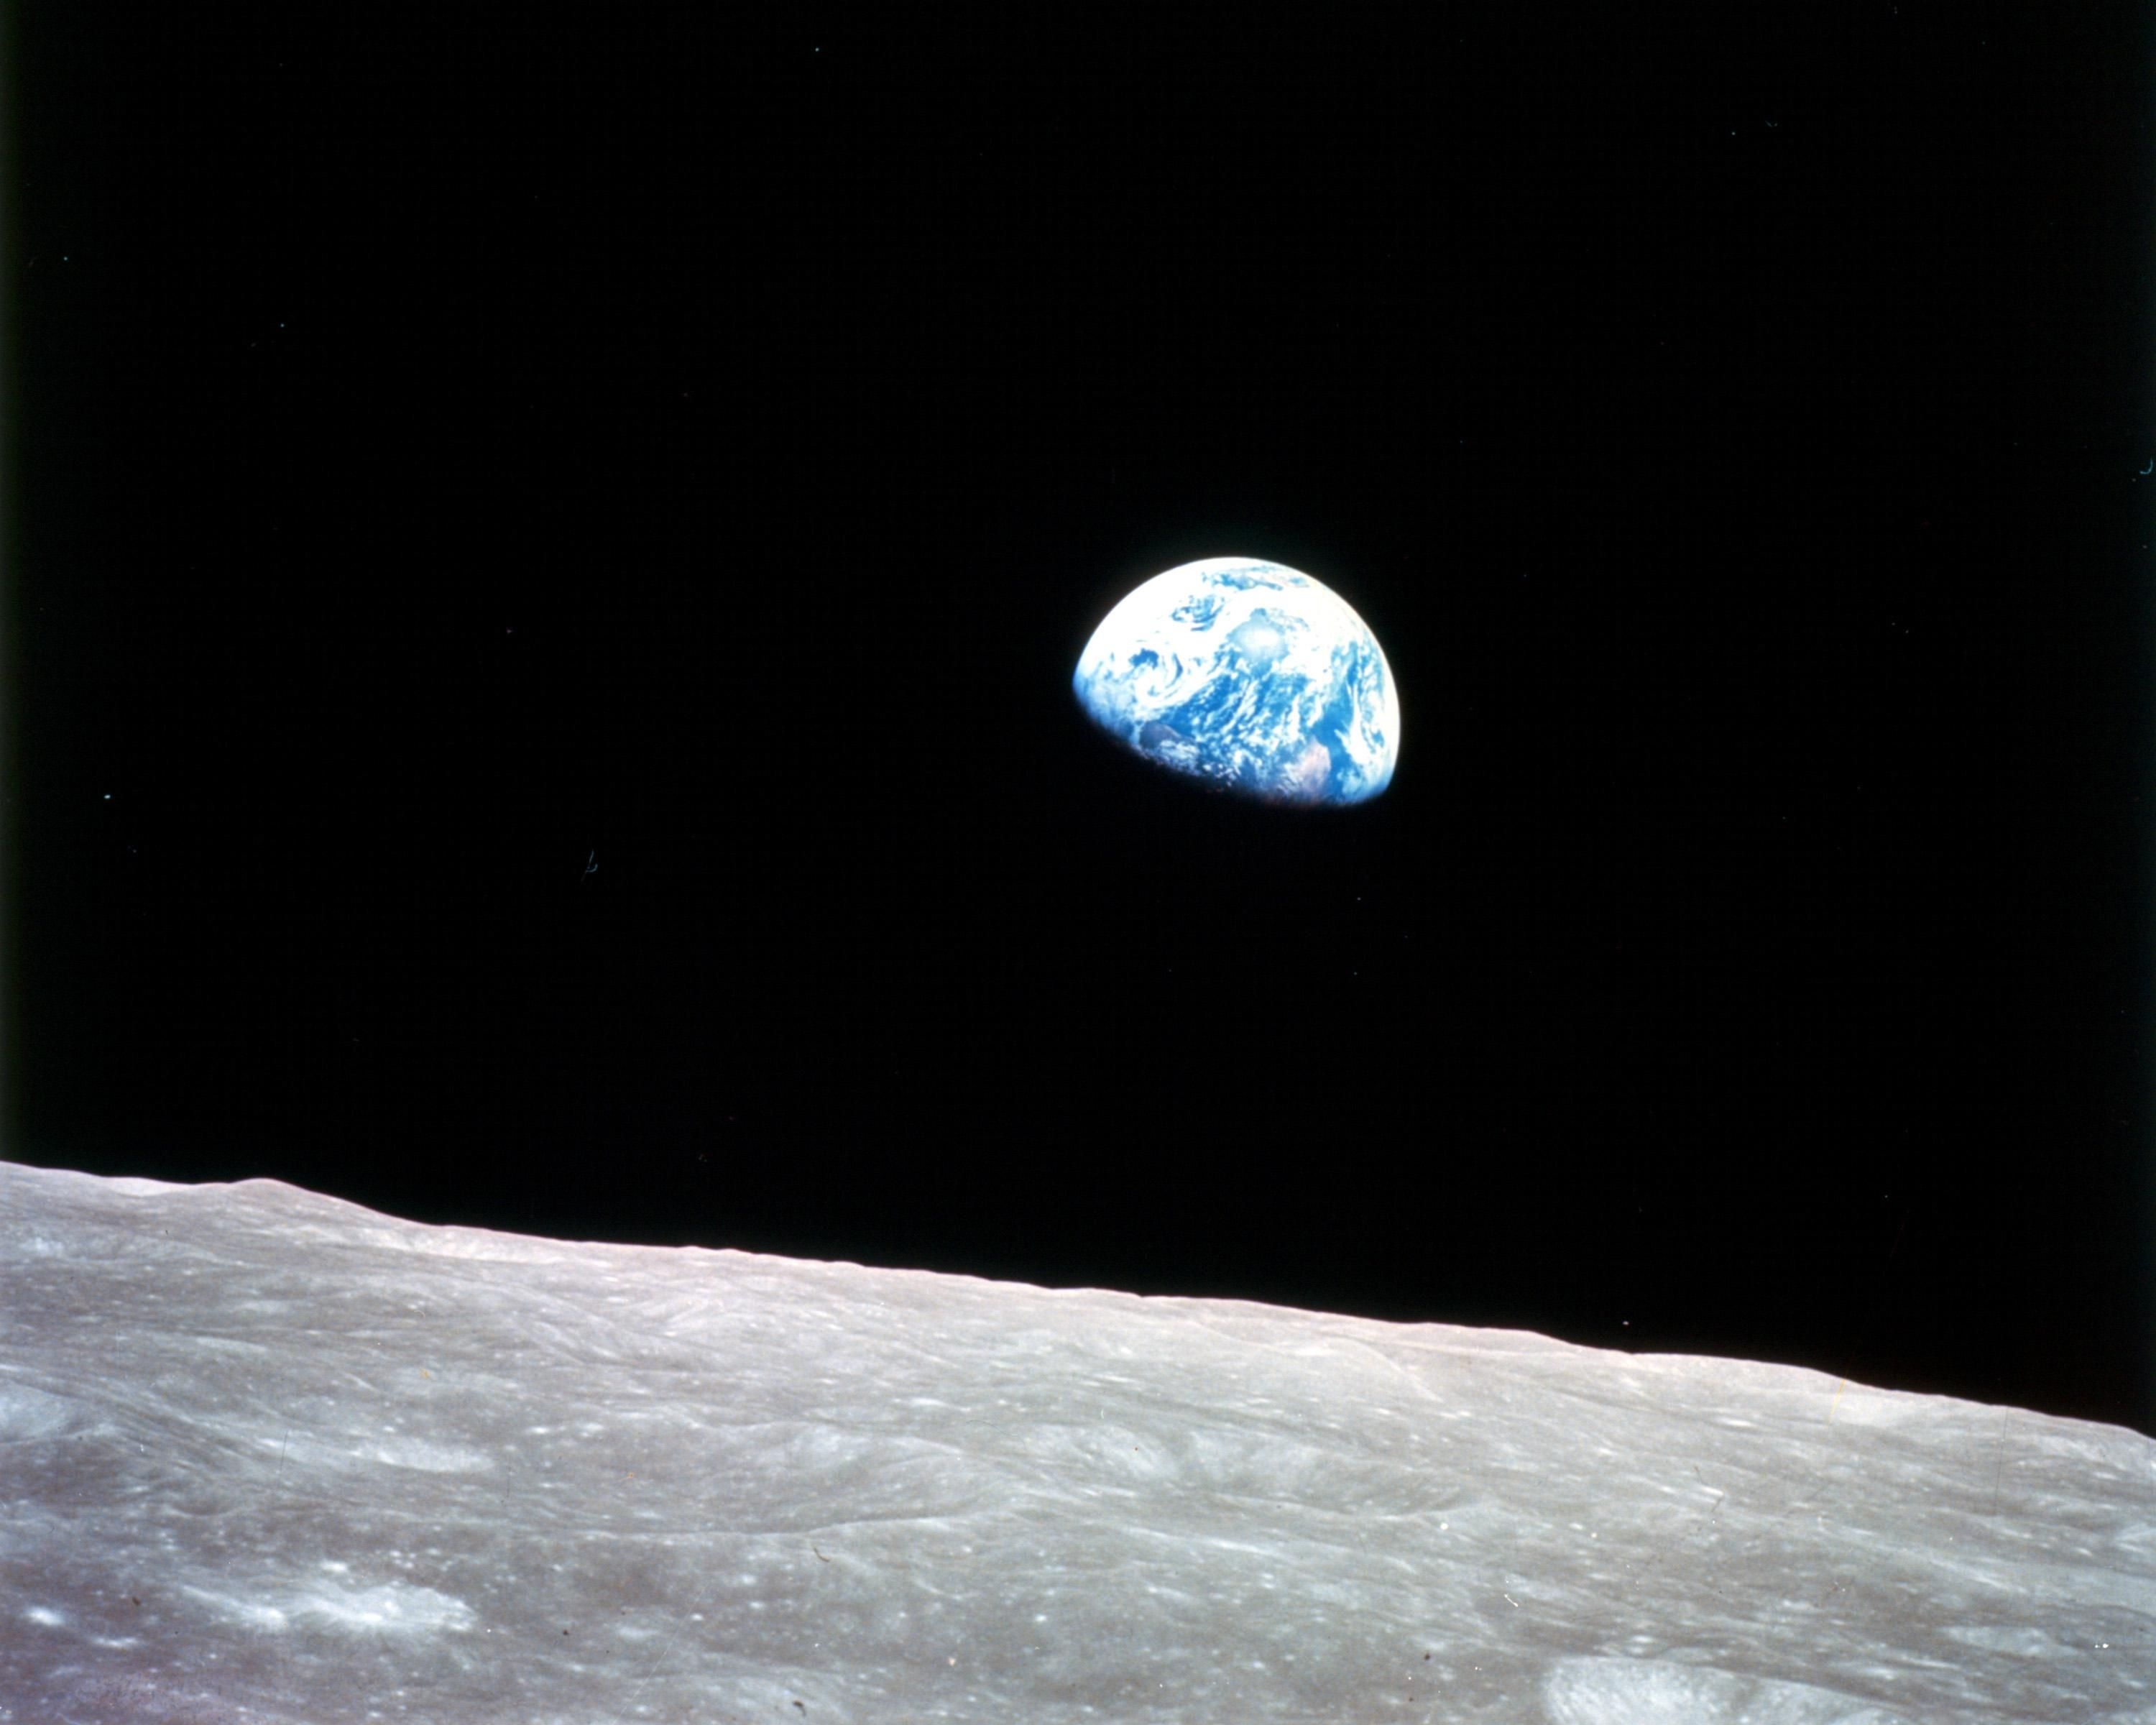 The famous "Earthrise" photo, taken on the first manned mission to the moon.